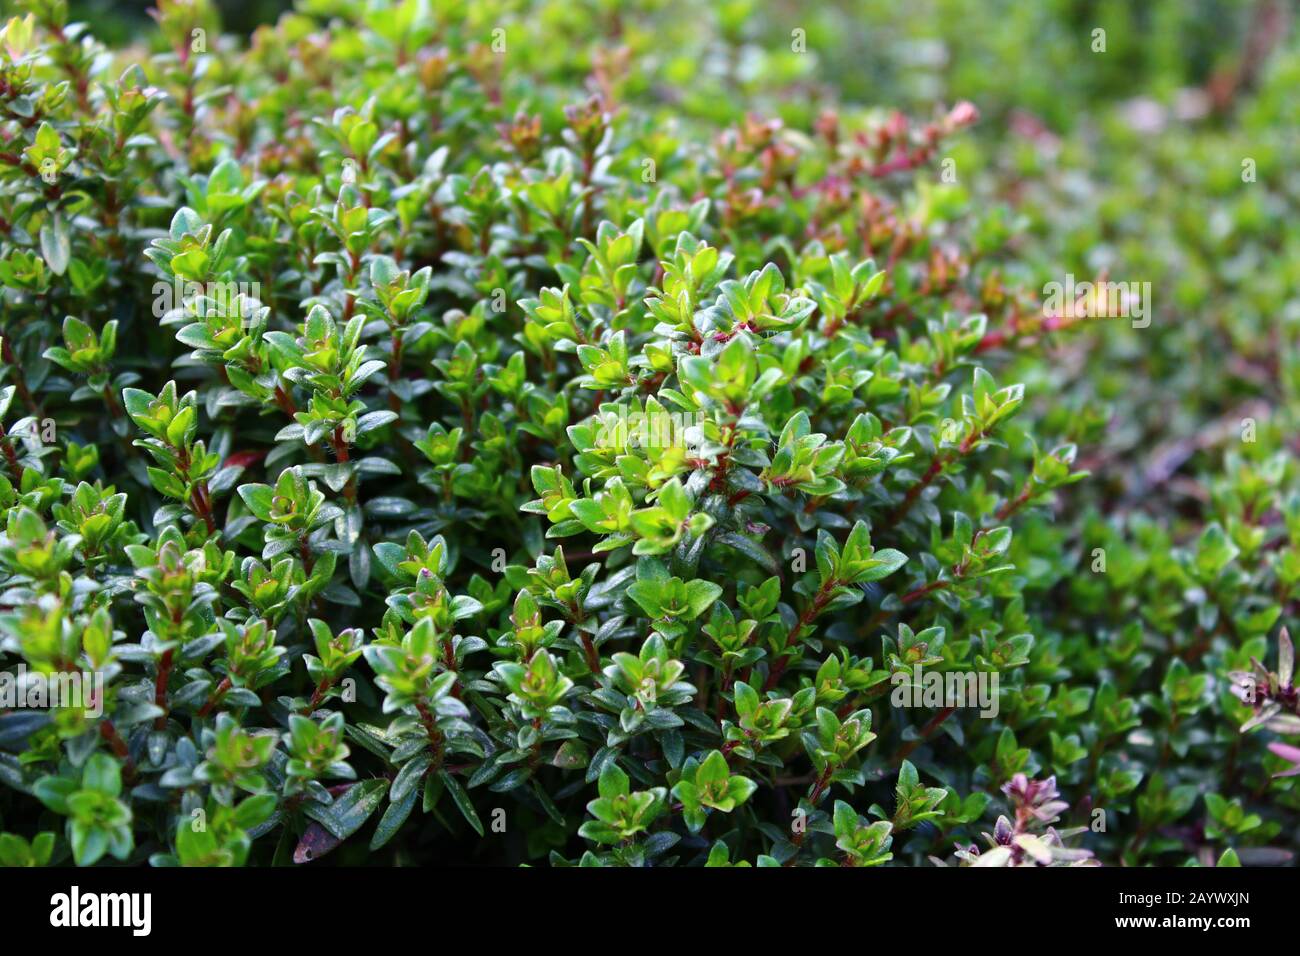 The Picture Shows Thyme In The Summer In The Garden Stock Photo